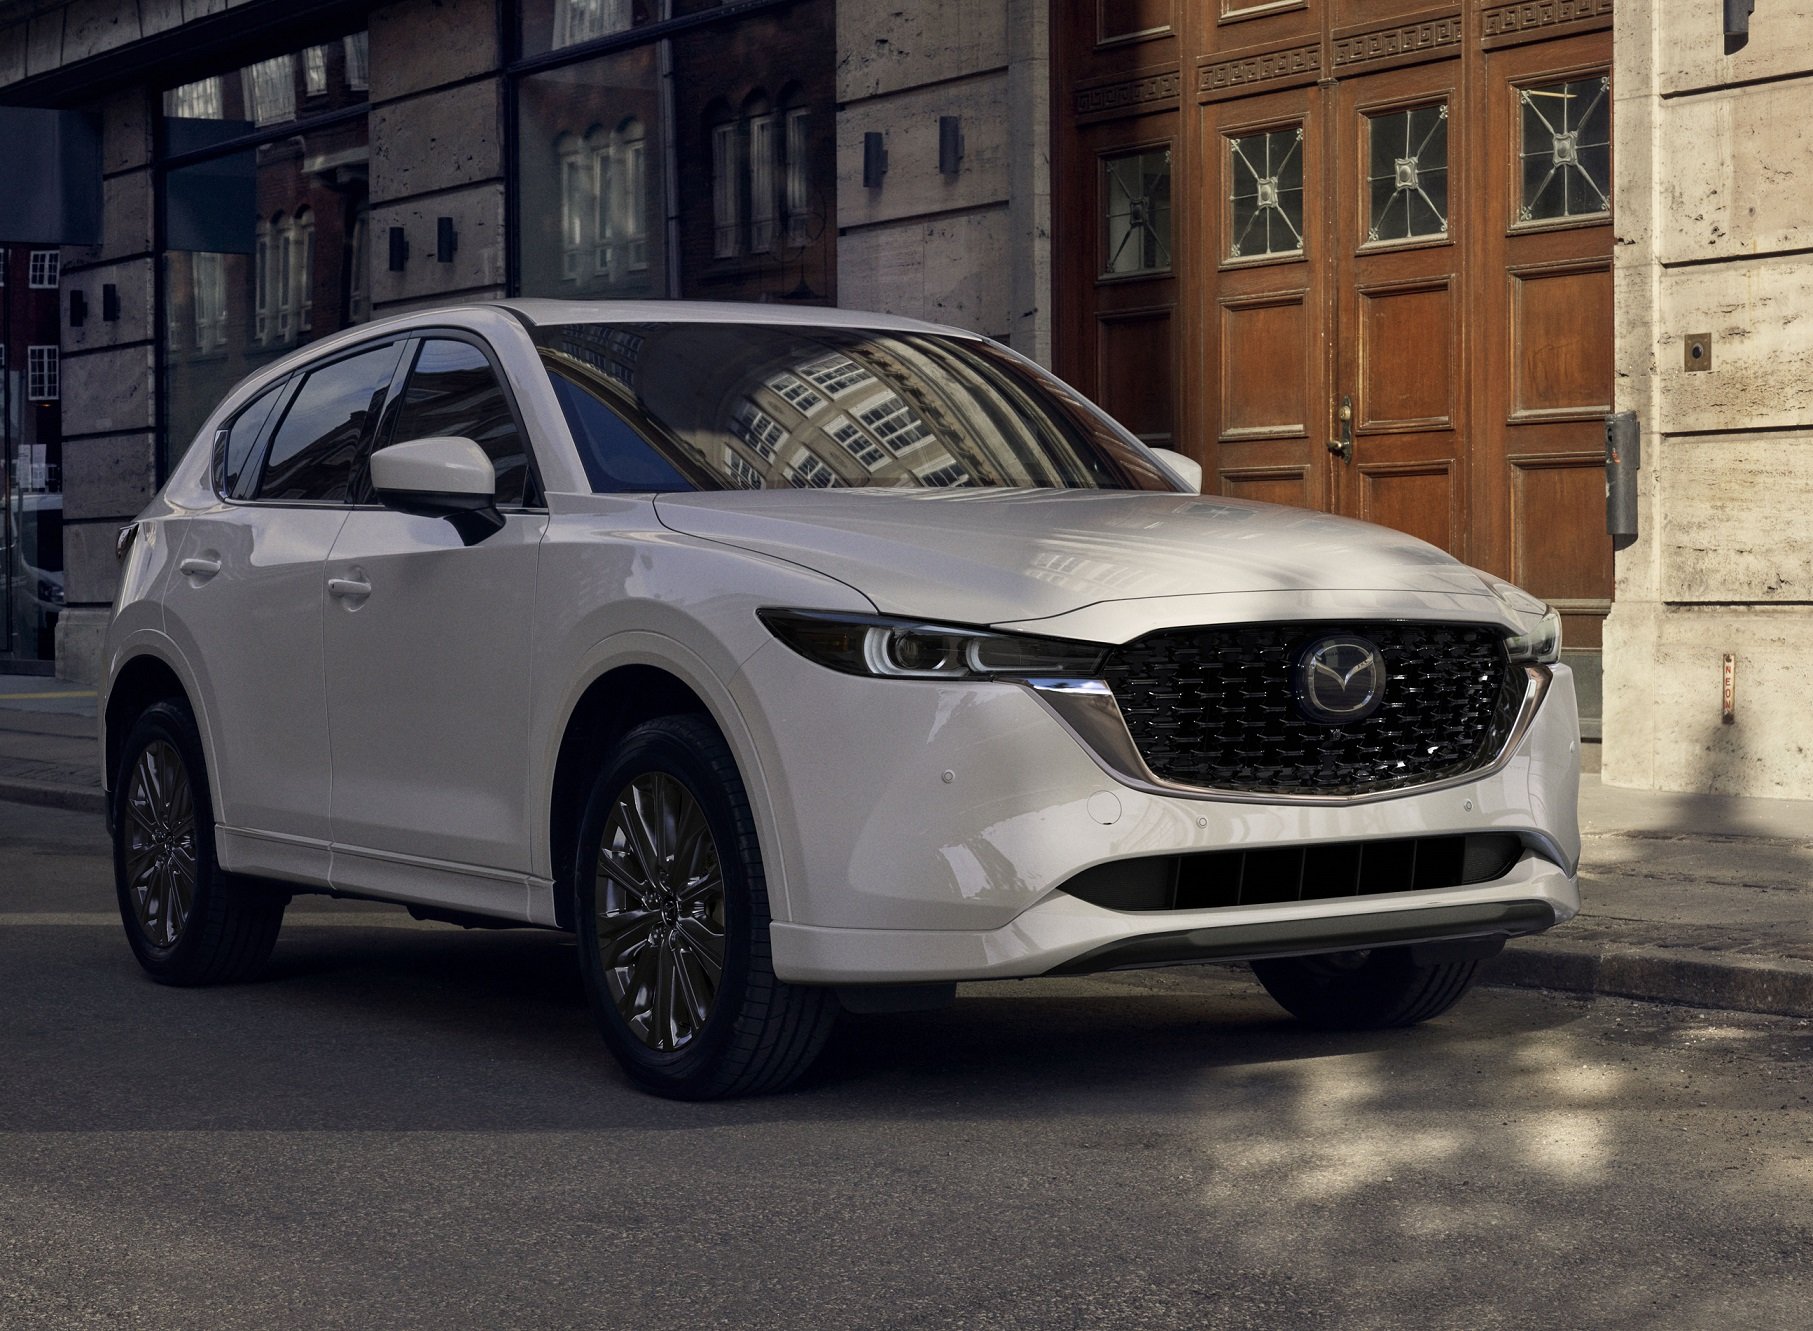 CX-5 is affordable suburban luxury.